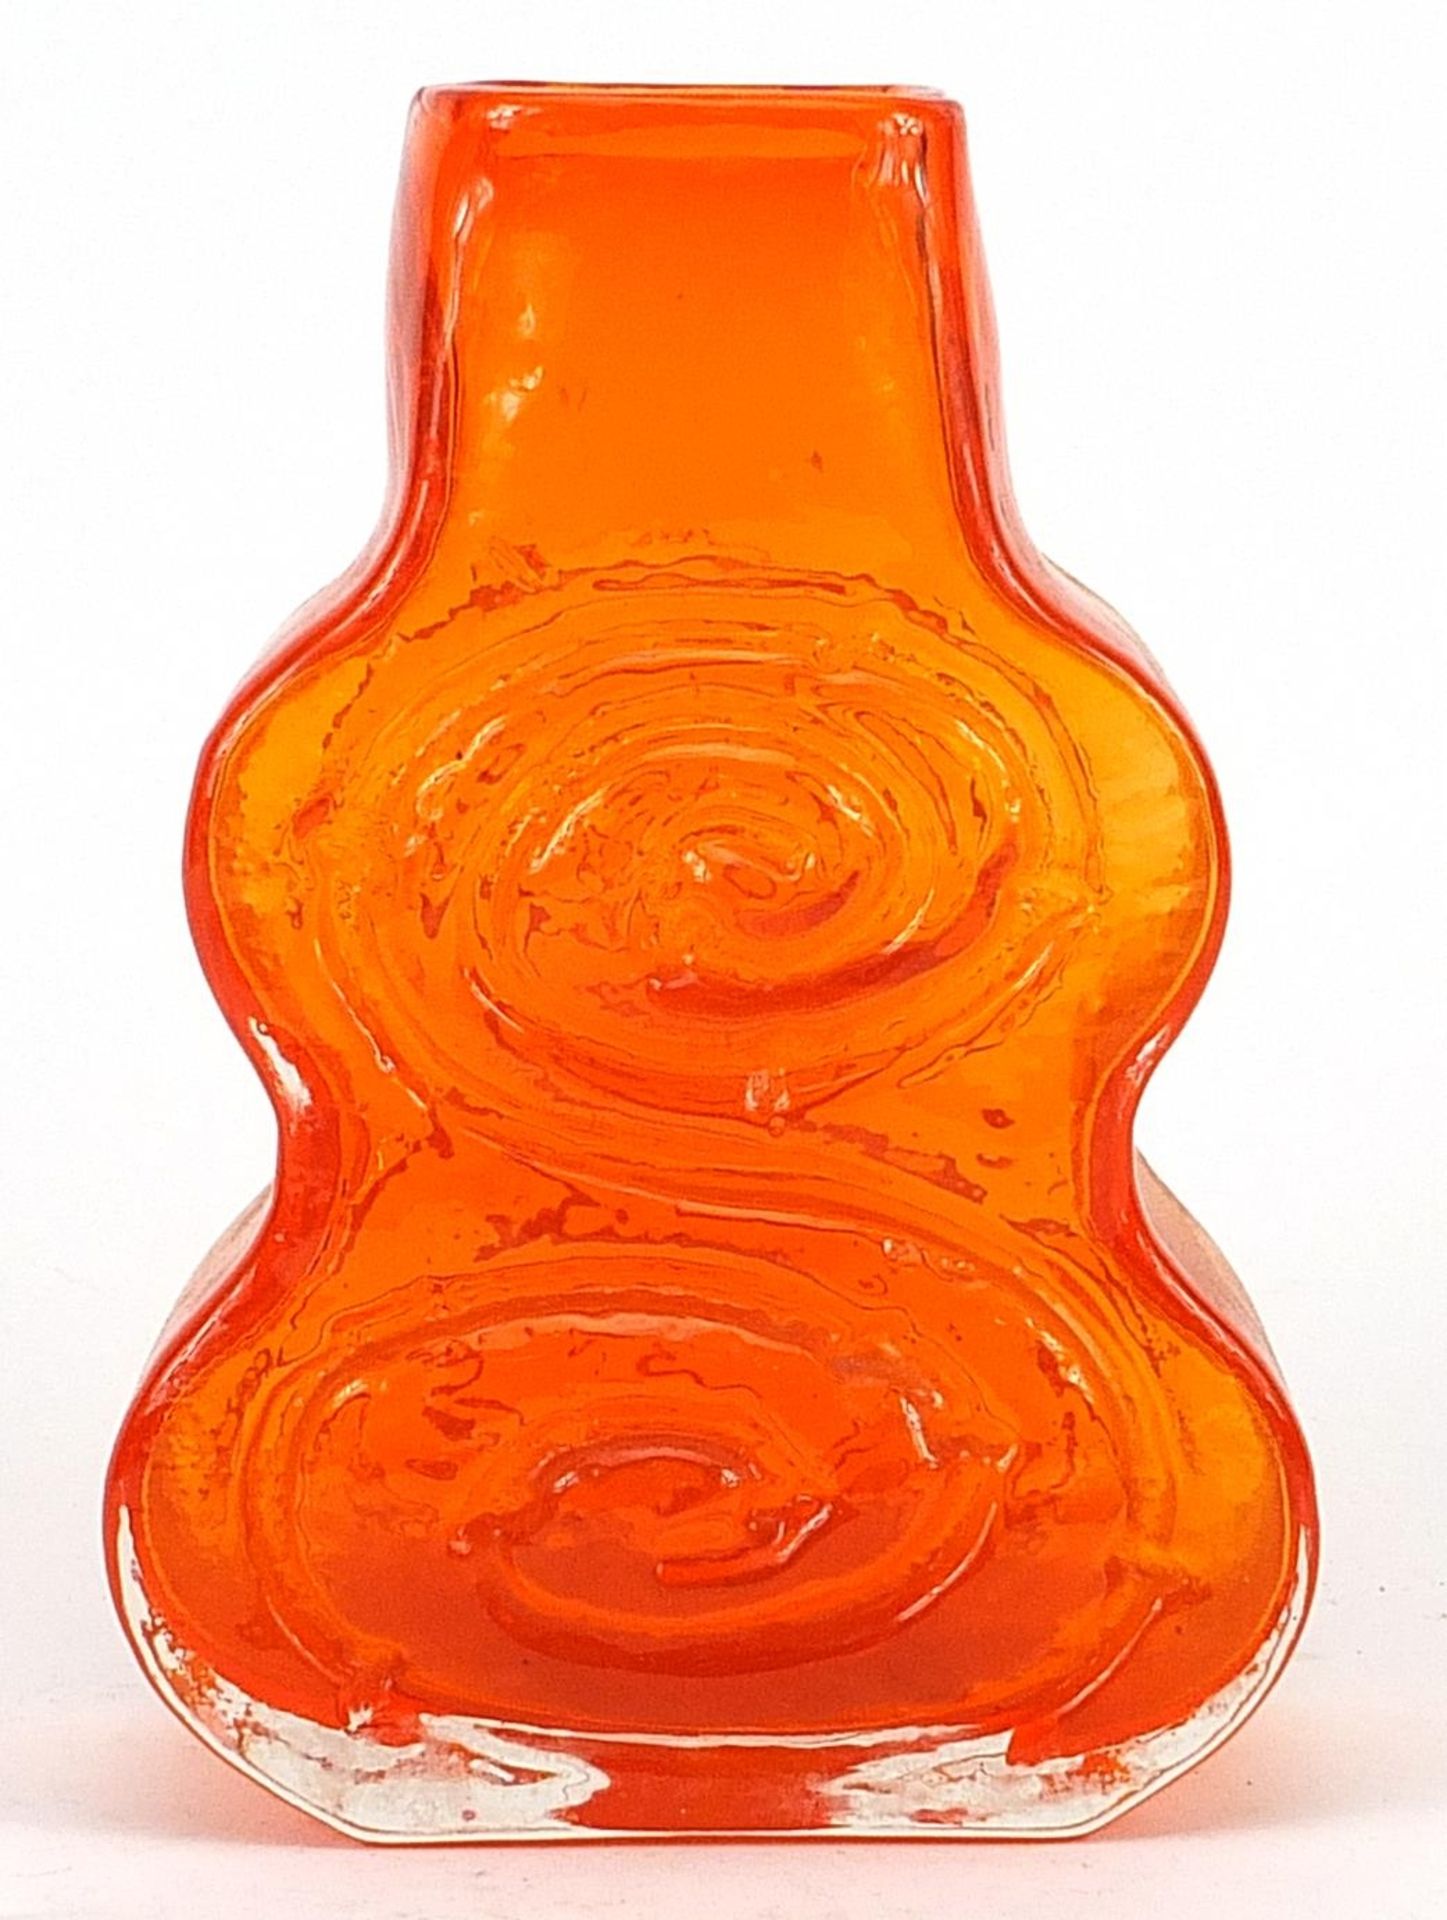 Geoffrey Baxter for Whitefriars, cello glass vase in tangerine, 18.5cm high Overall in generally